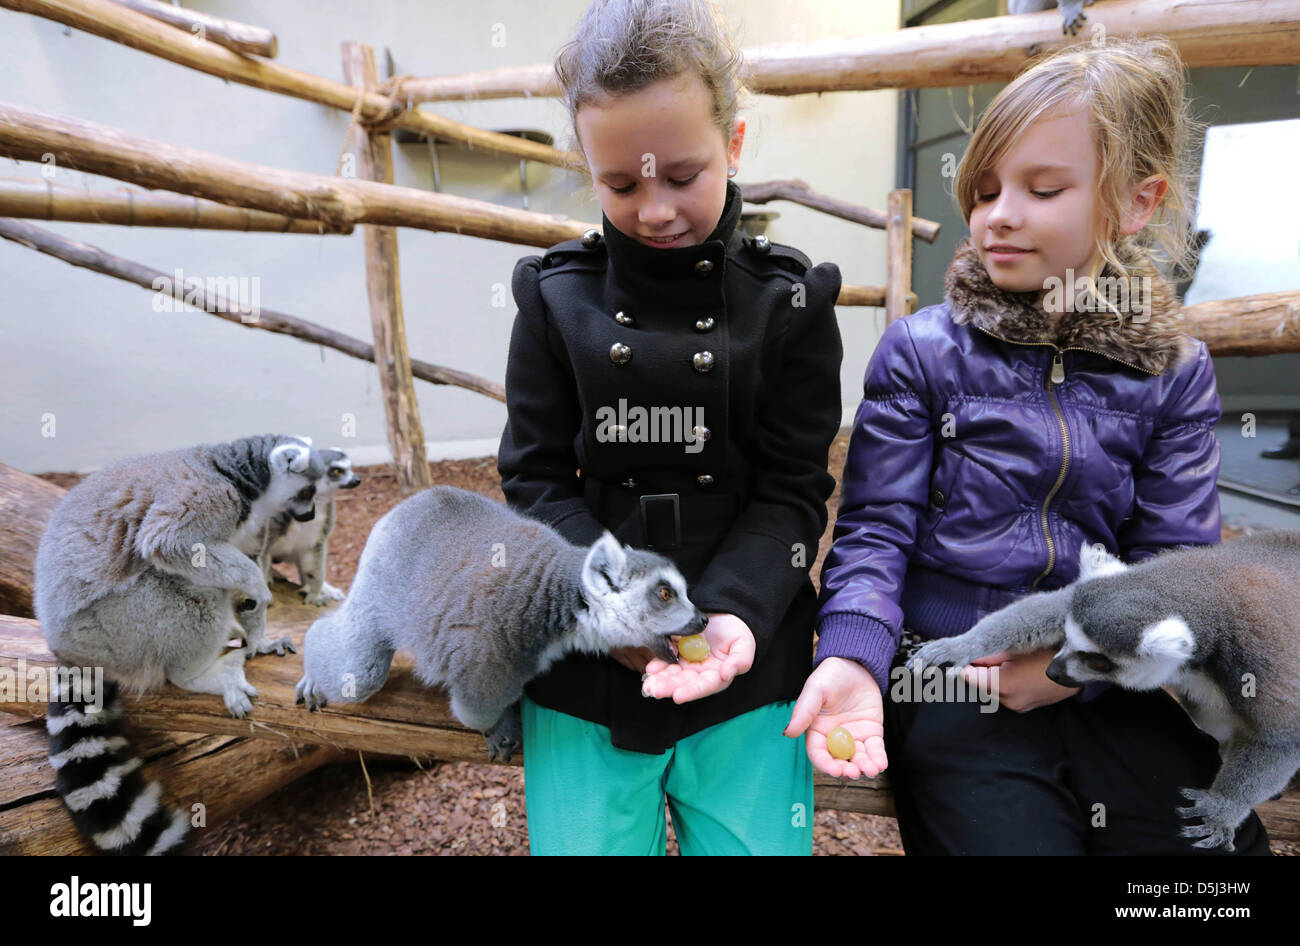 The sisters Anne and Vera Theunissen enjoy feeding the lemures with snacks at Burgers' Zoo in Arnhem, Netherlands on November 13,2012. The zoo invited the girls to feed the animals by hand because they raised a smart question about those prosimians. Photo: Vidiphoto Stock Photo